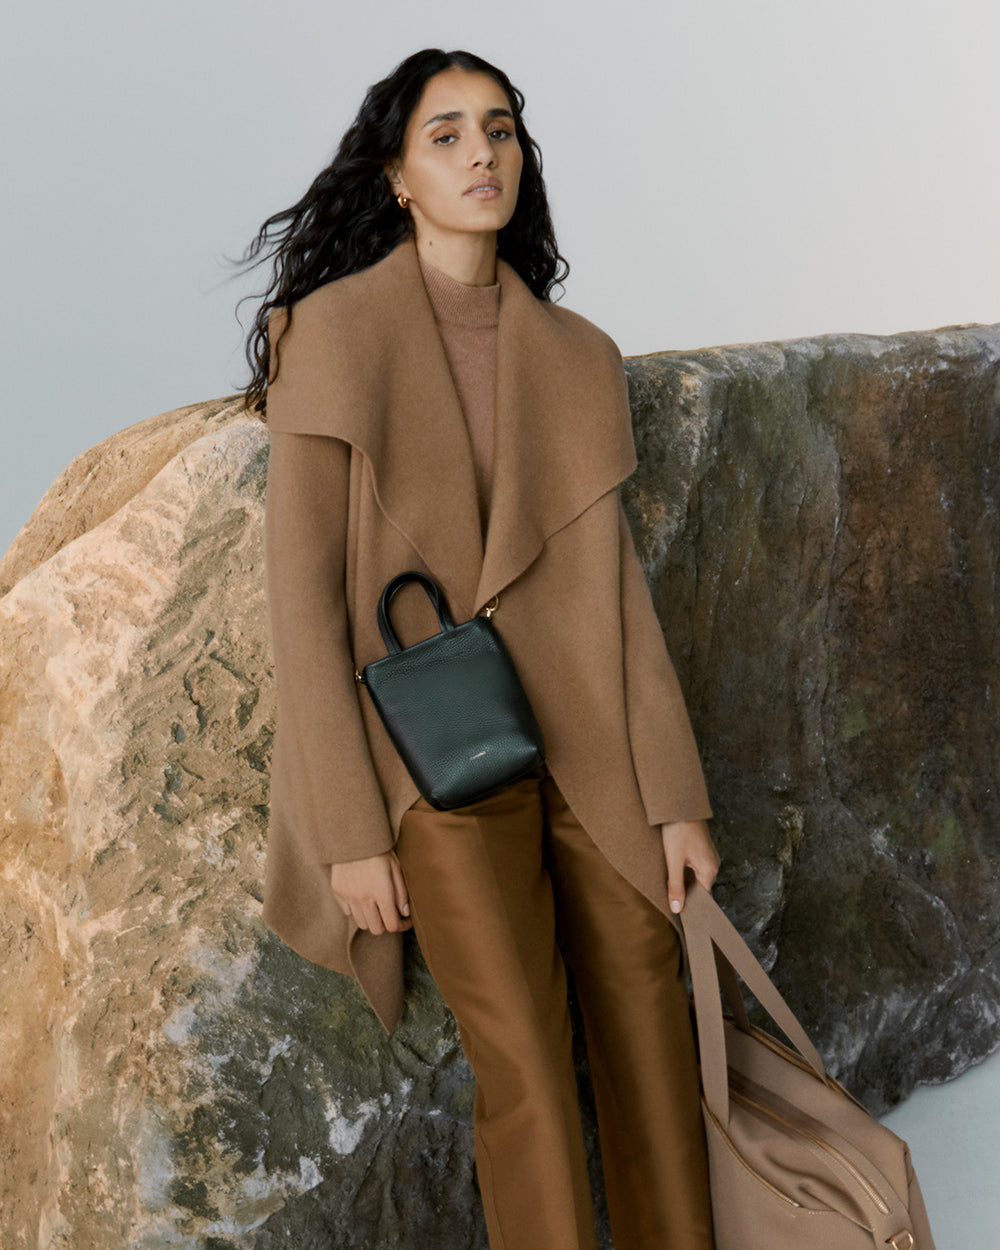 Woman standing next to a large rock, holding a bag, wearing a long coat.